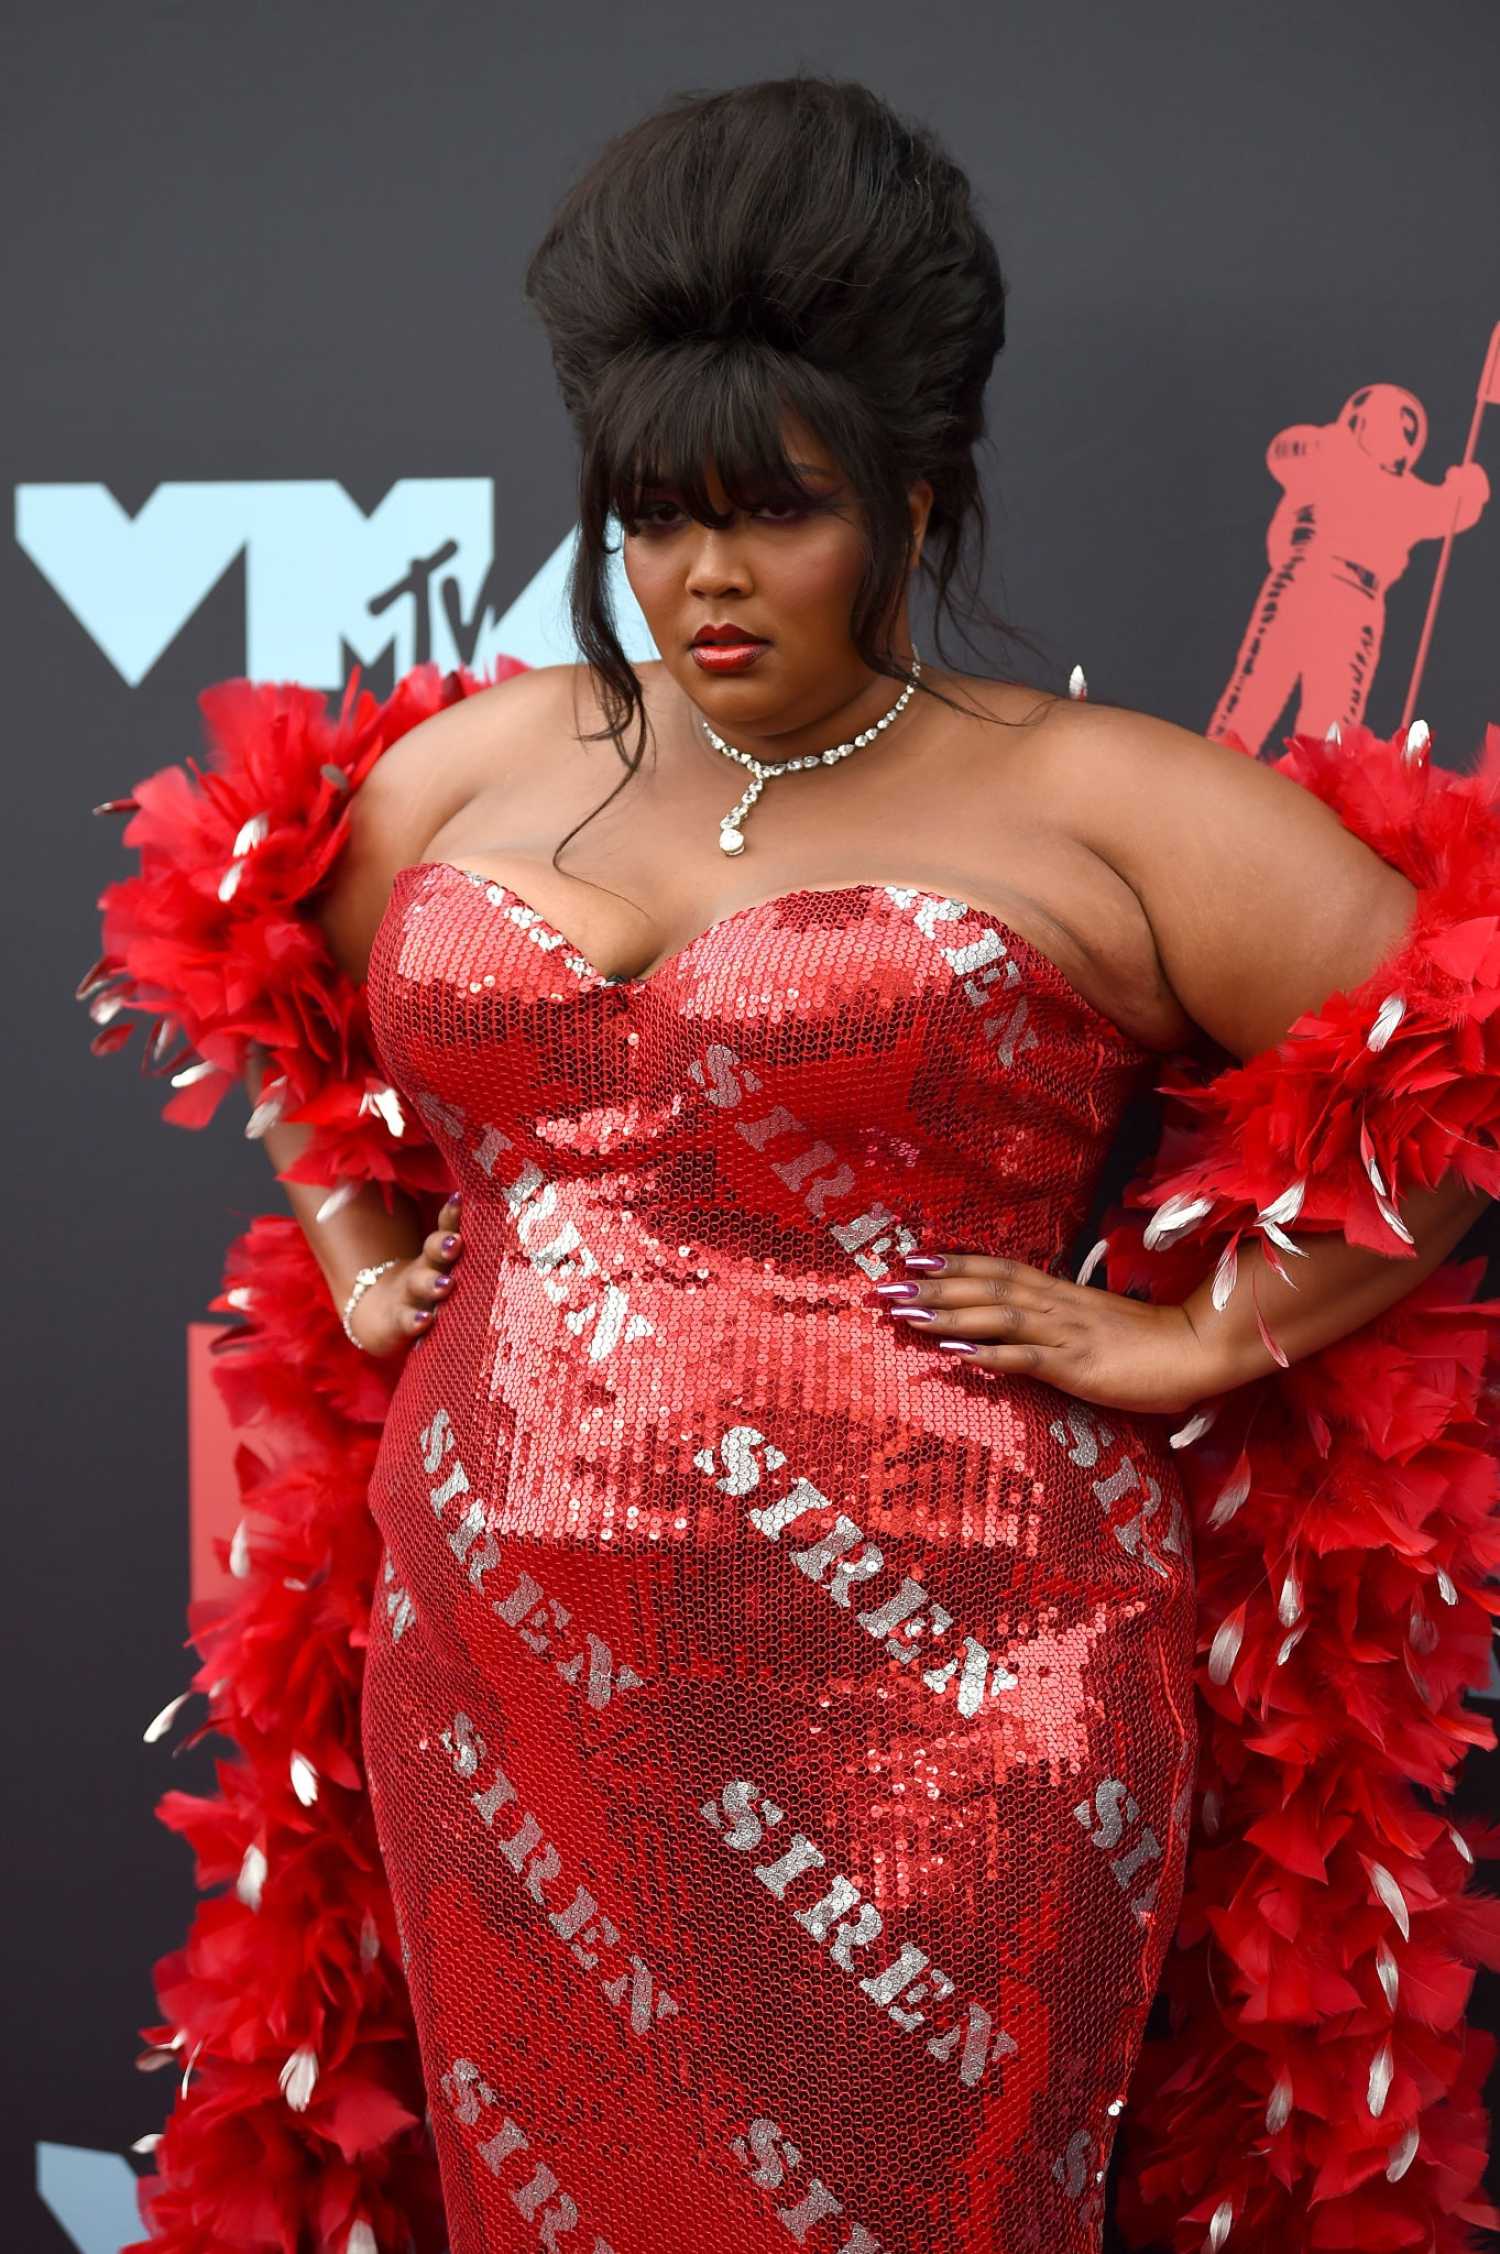 Lizzo Attends the 2019 MTV Video Music Awards at Prudential Center in